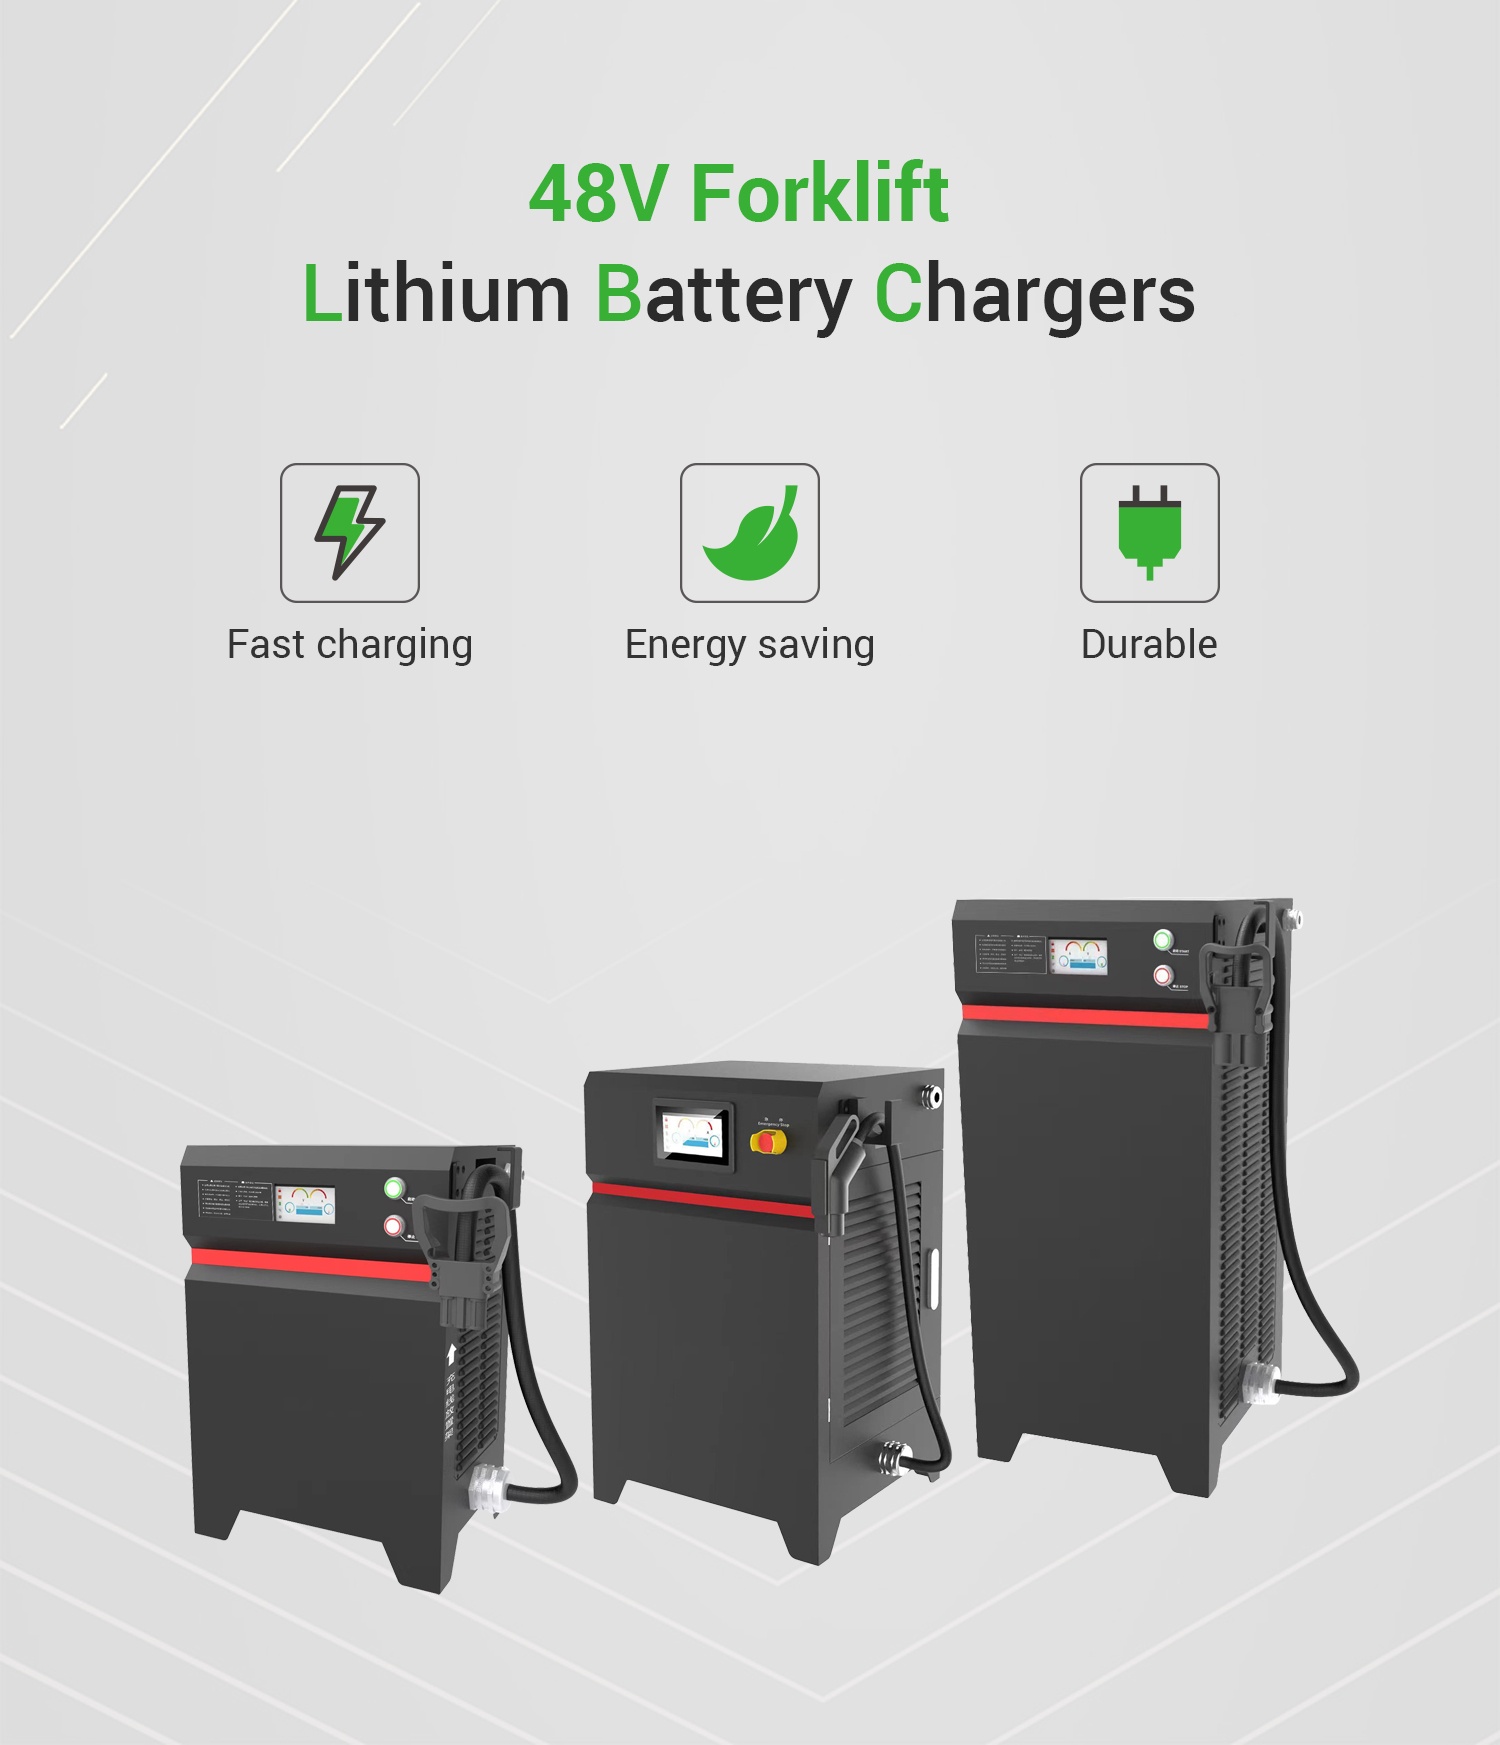 IMPROVE Forklift Lithium Battery Chargers